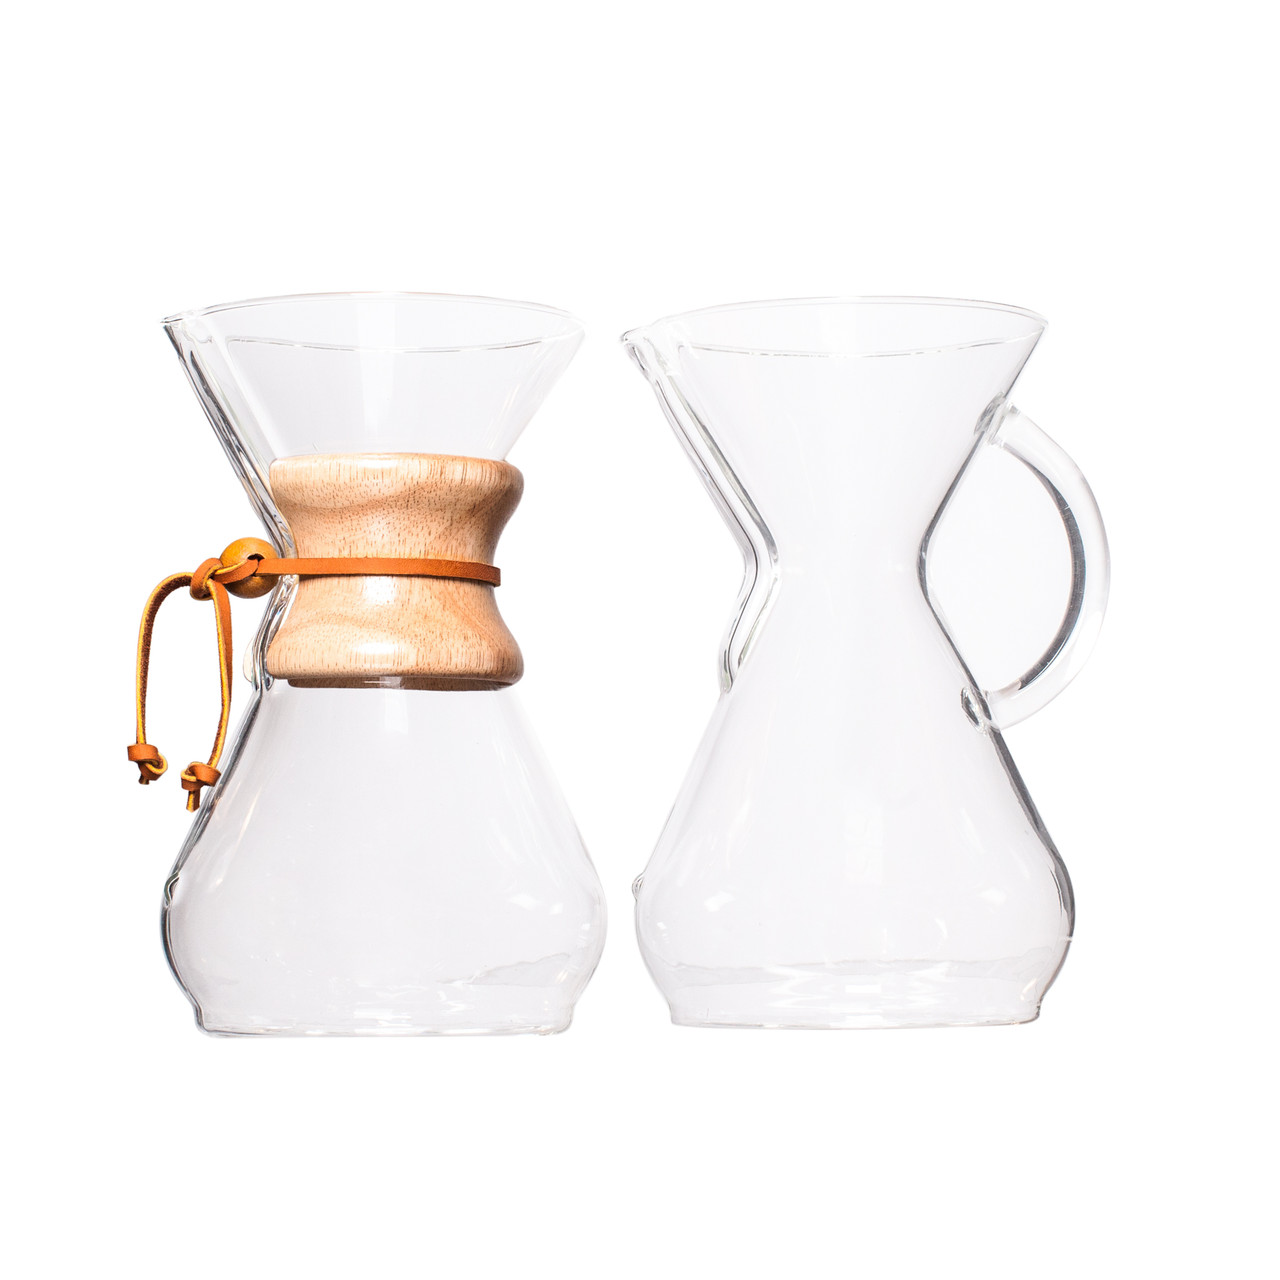 https://cdn11.bigcommerce.com/s-6h7ychjk4/images/stencil/1280x1280/products/7777/87734/chemex-8-cup-lineup__05605.1597951629.jpg?c=1&imbypass=on